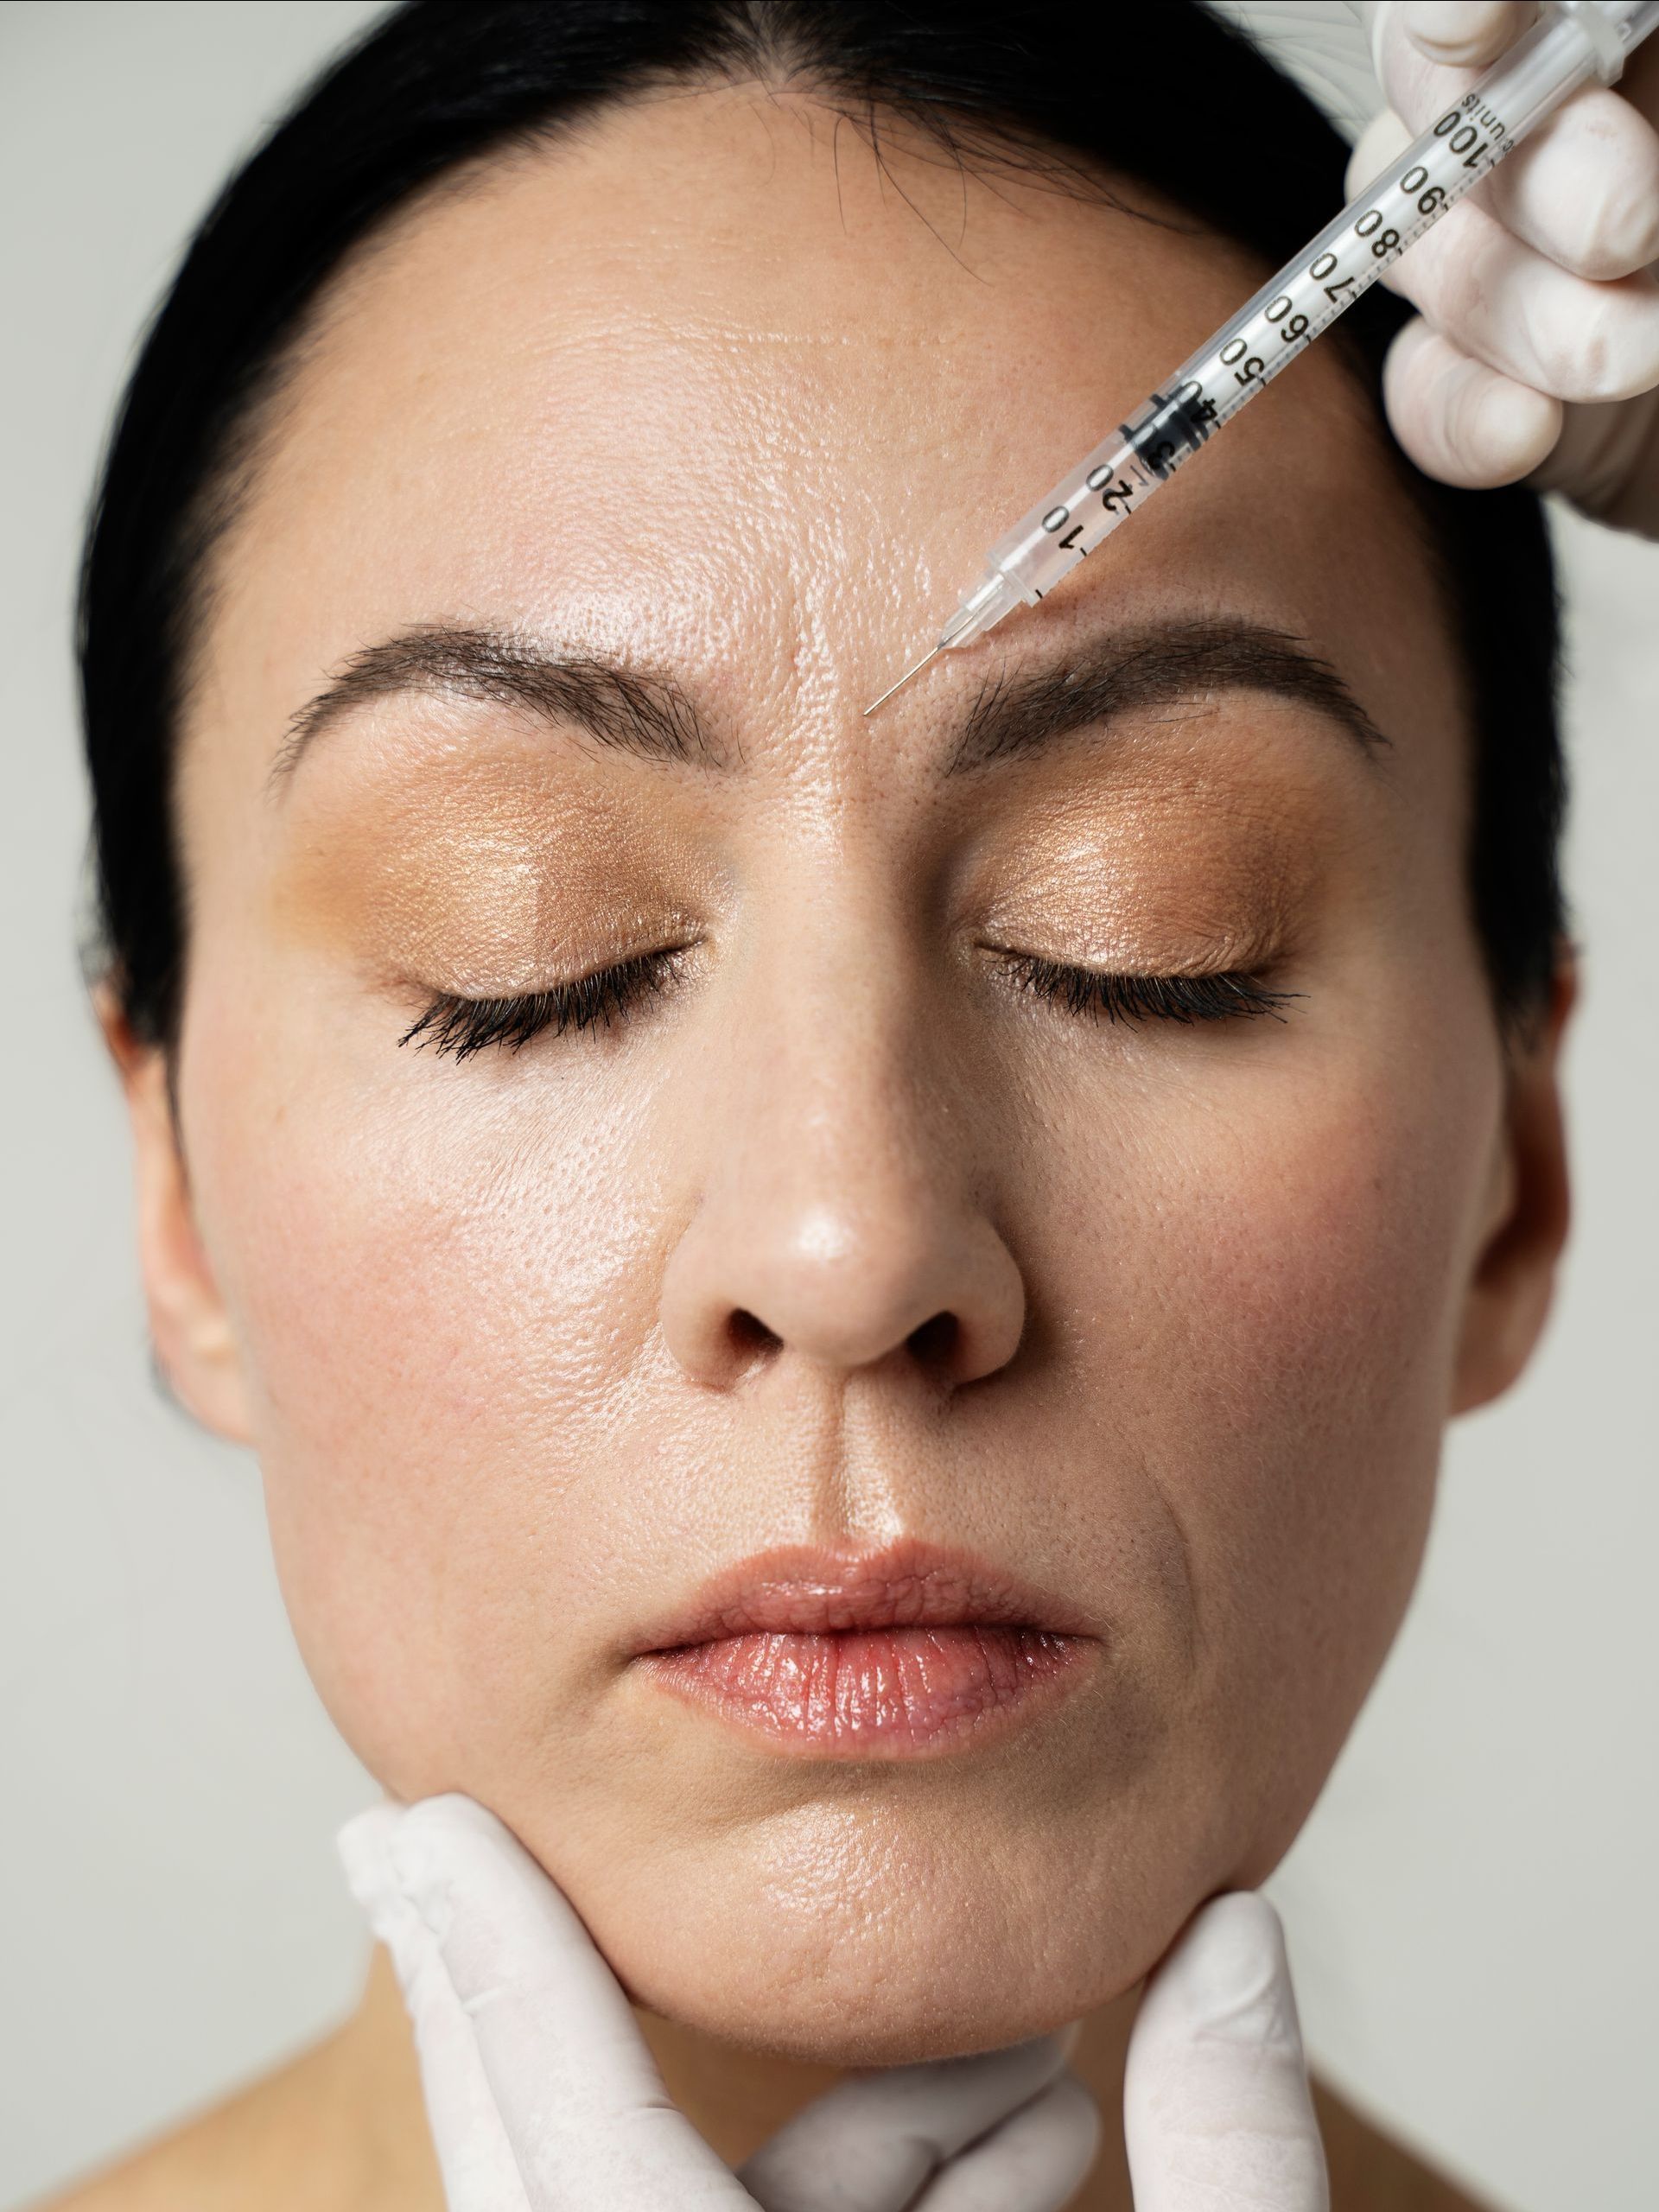 woman getting botox injections